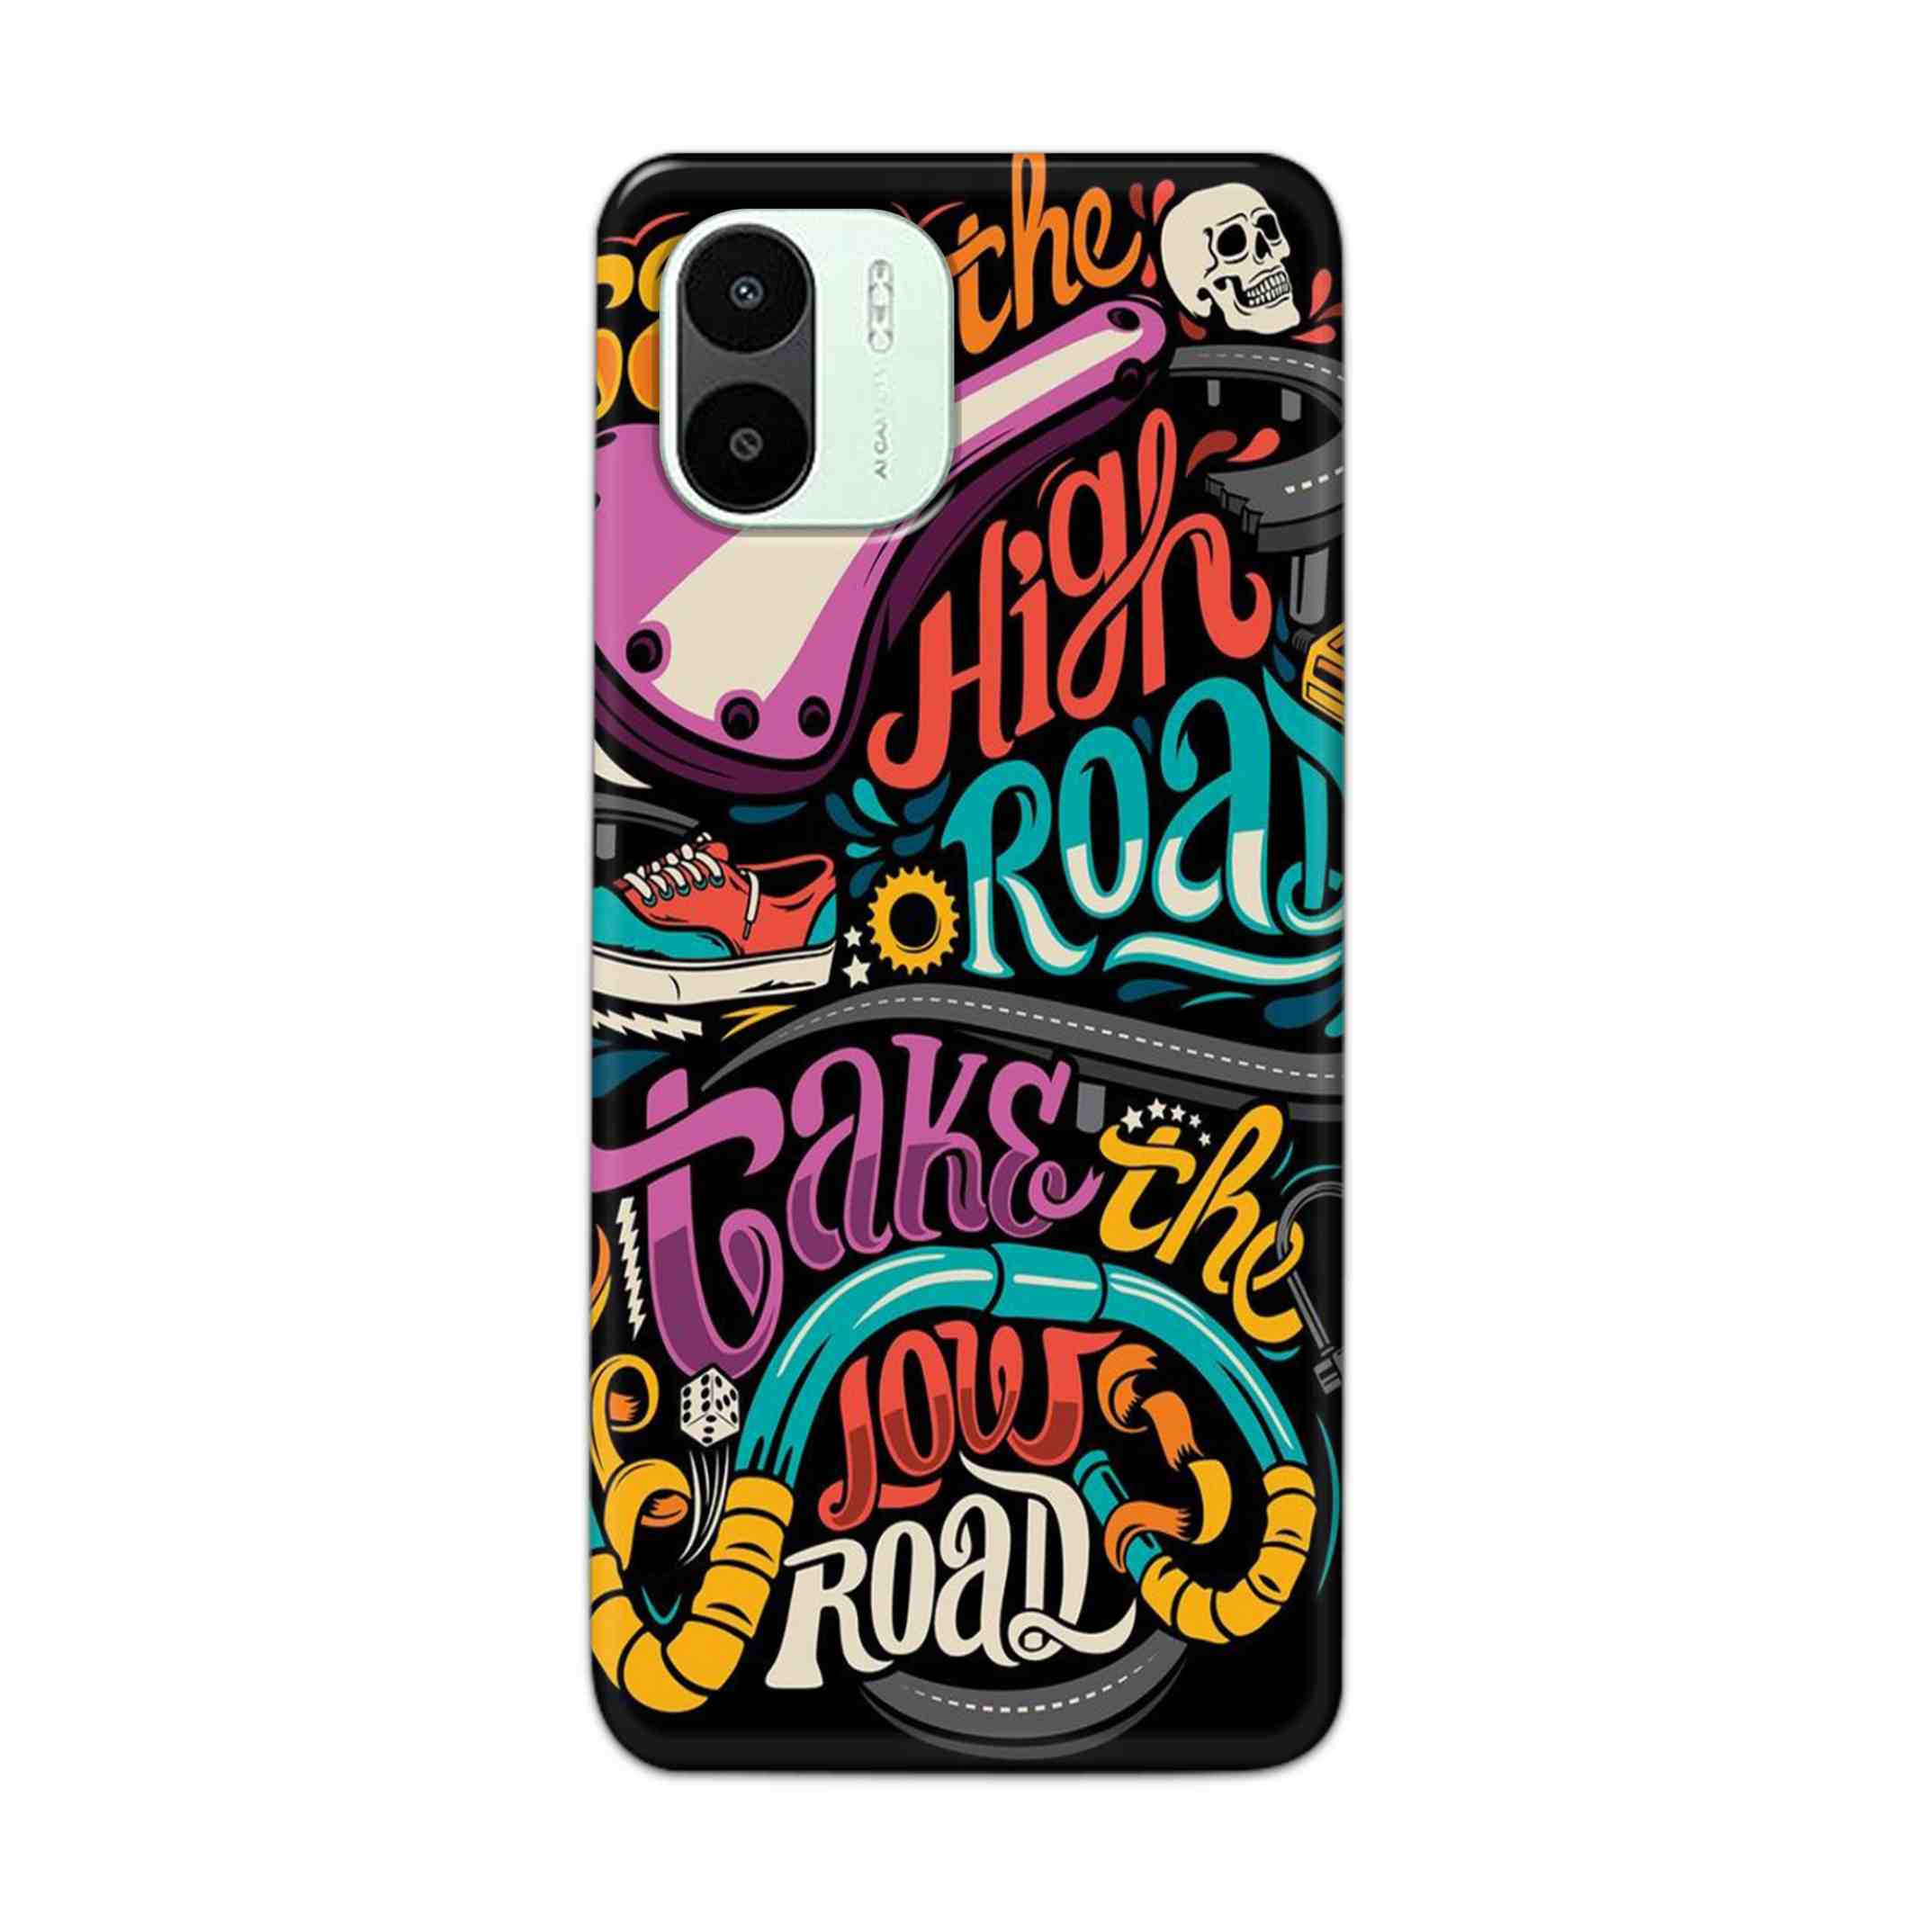 Buy Take The High Road Hard Back Mobile Phone Case Cover For Xiaomi Redmi A1 5G Online